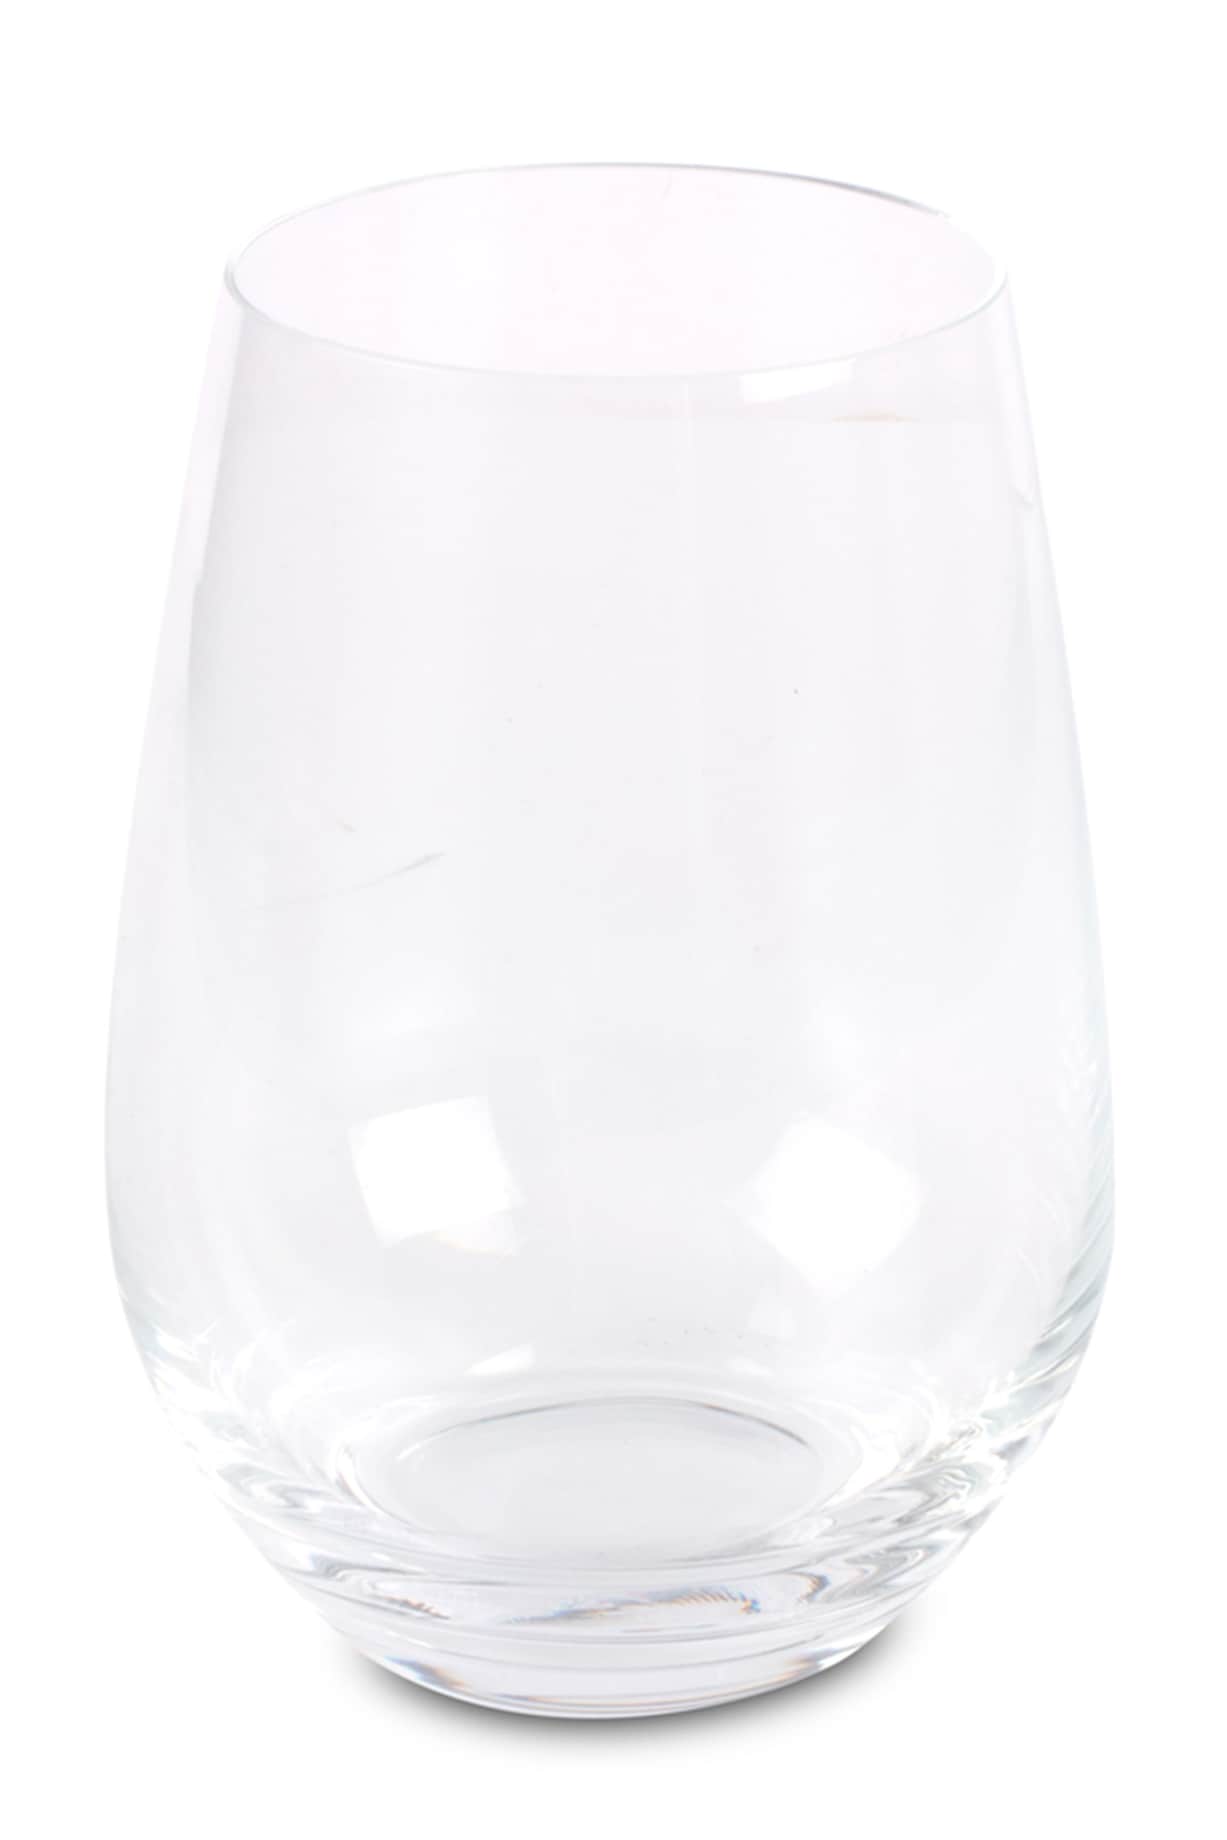 Heisey Clear Round Wine Glasses - Set of 5 – Treasures Upscale Consignment